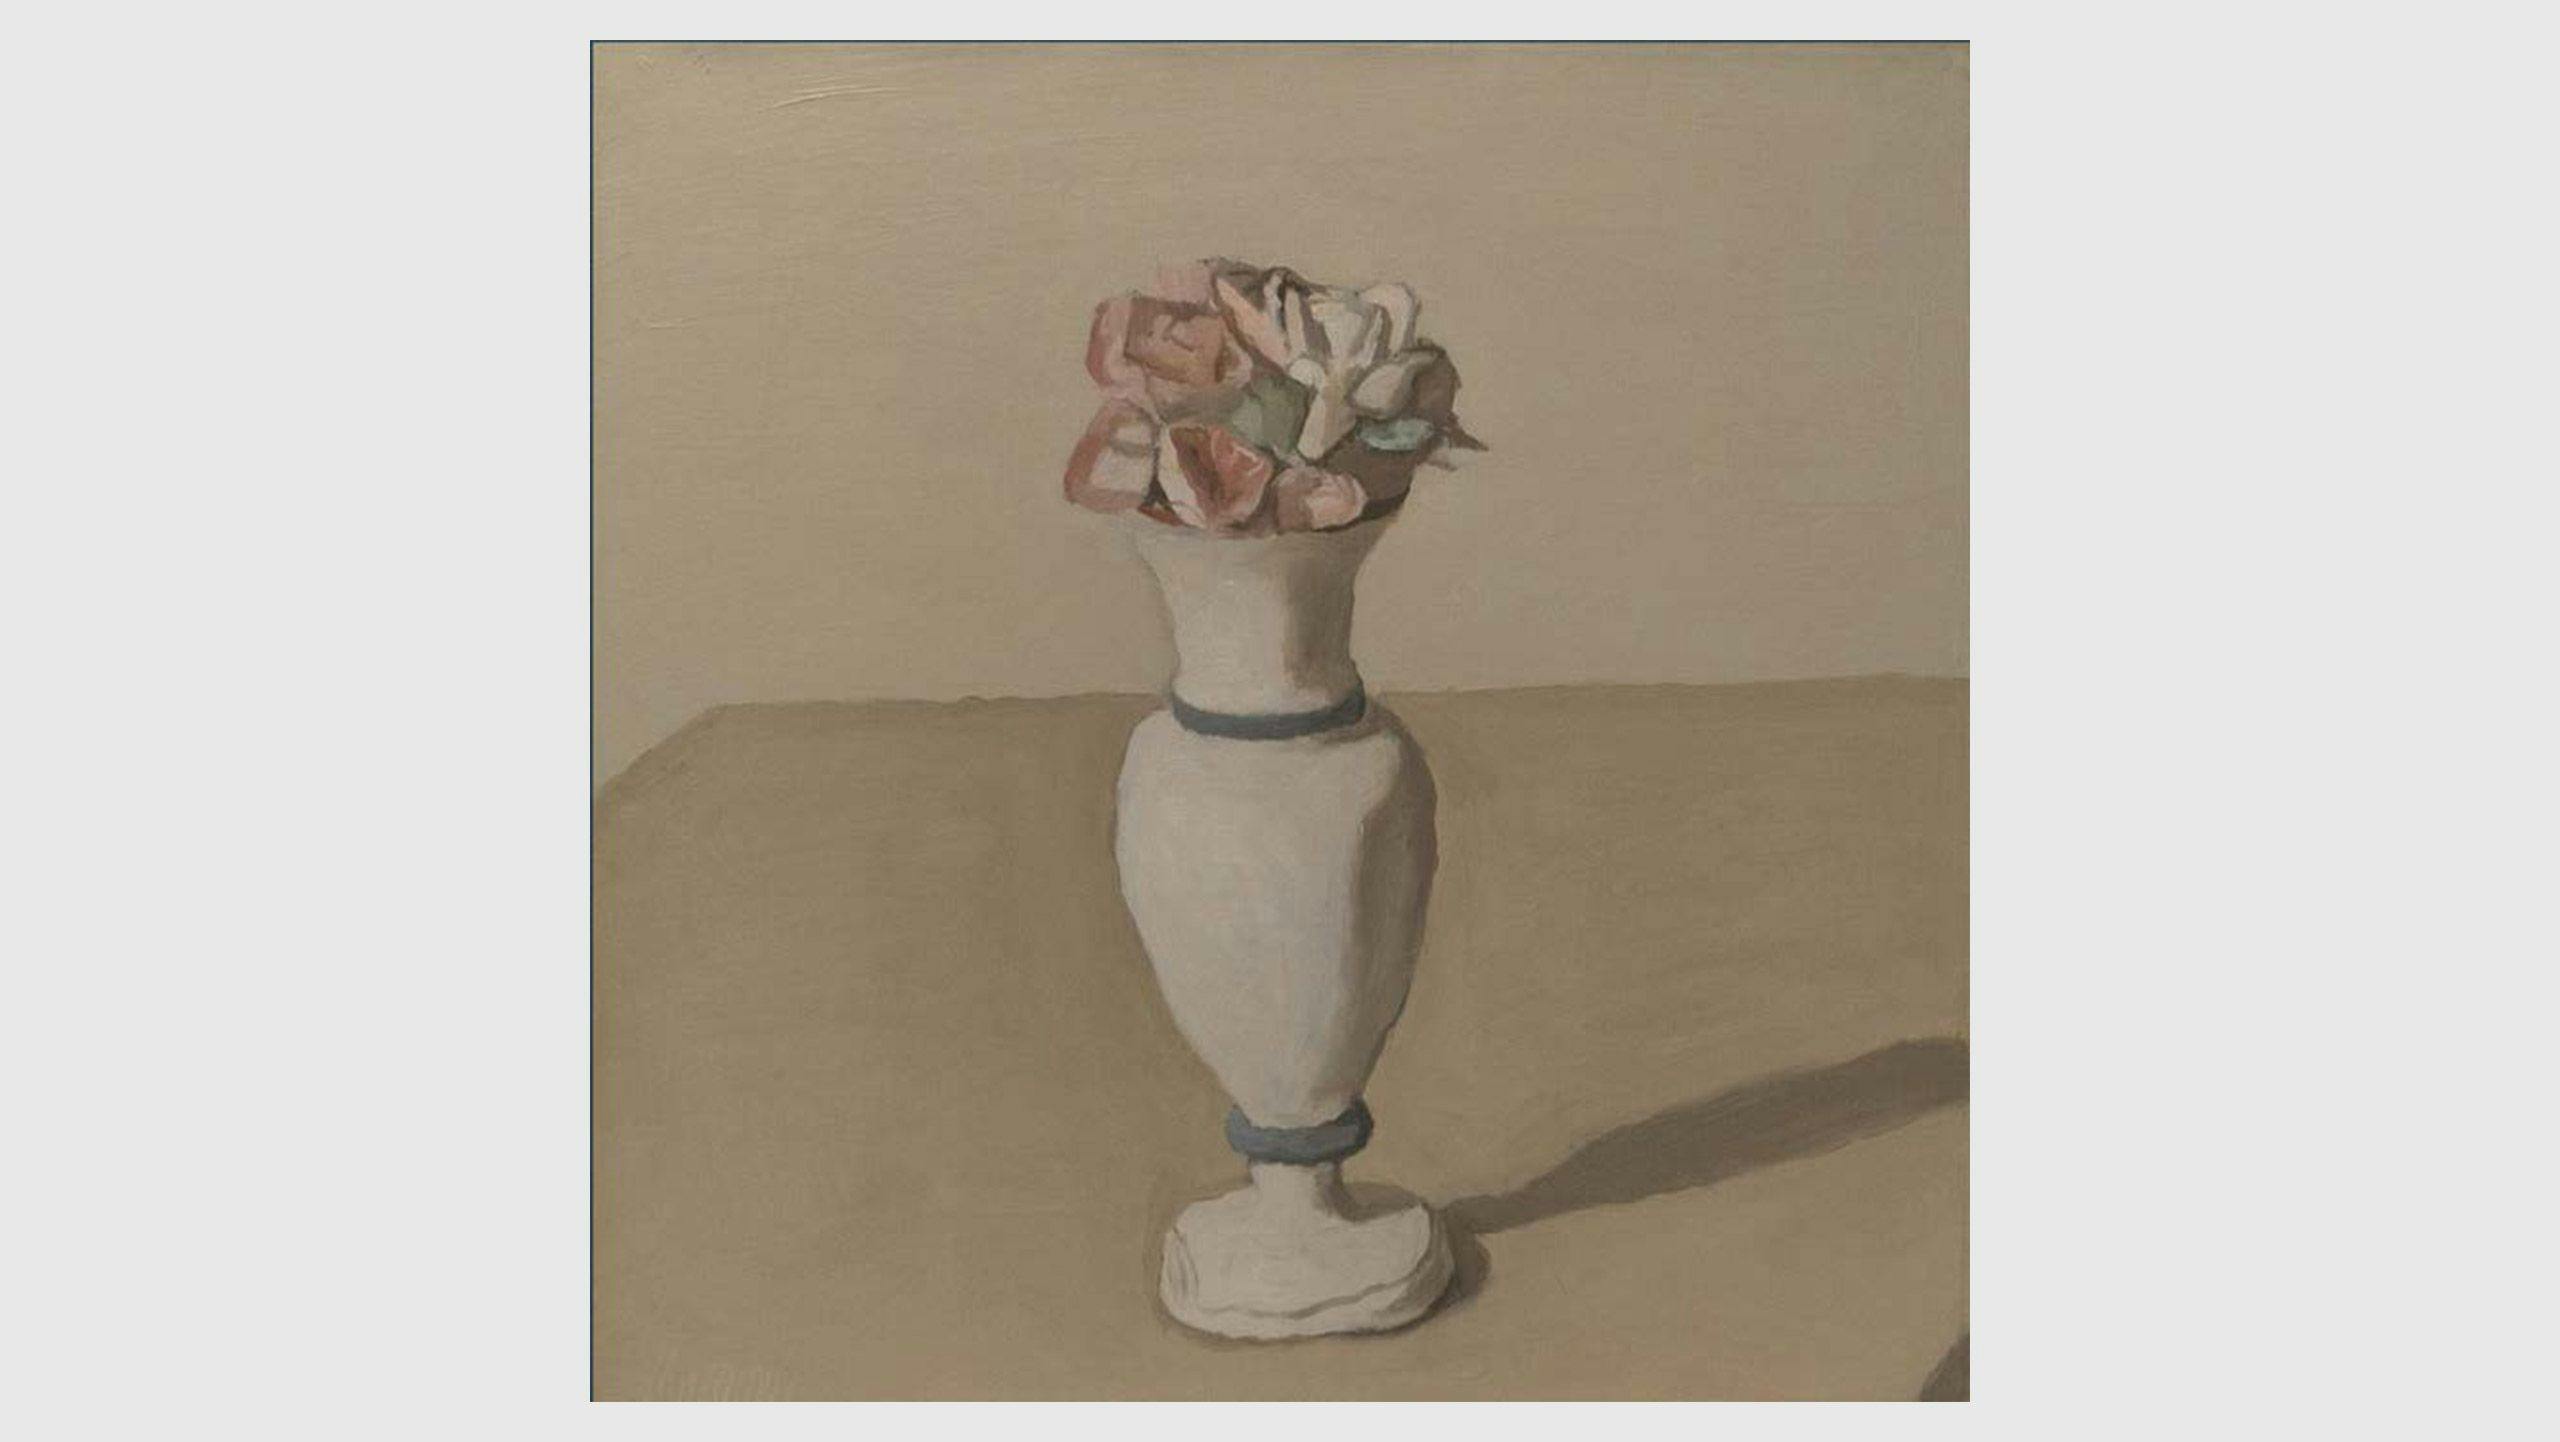 A painting by Giorgio Morandi, titled Fiori (Flowers), dated 1952